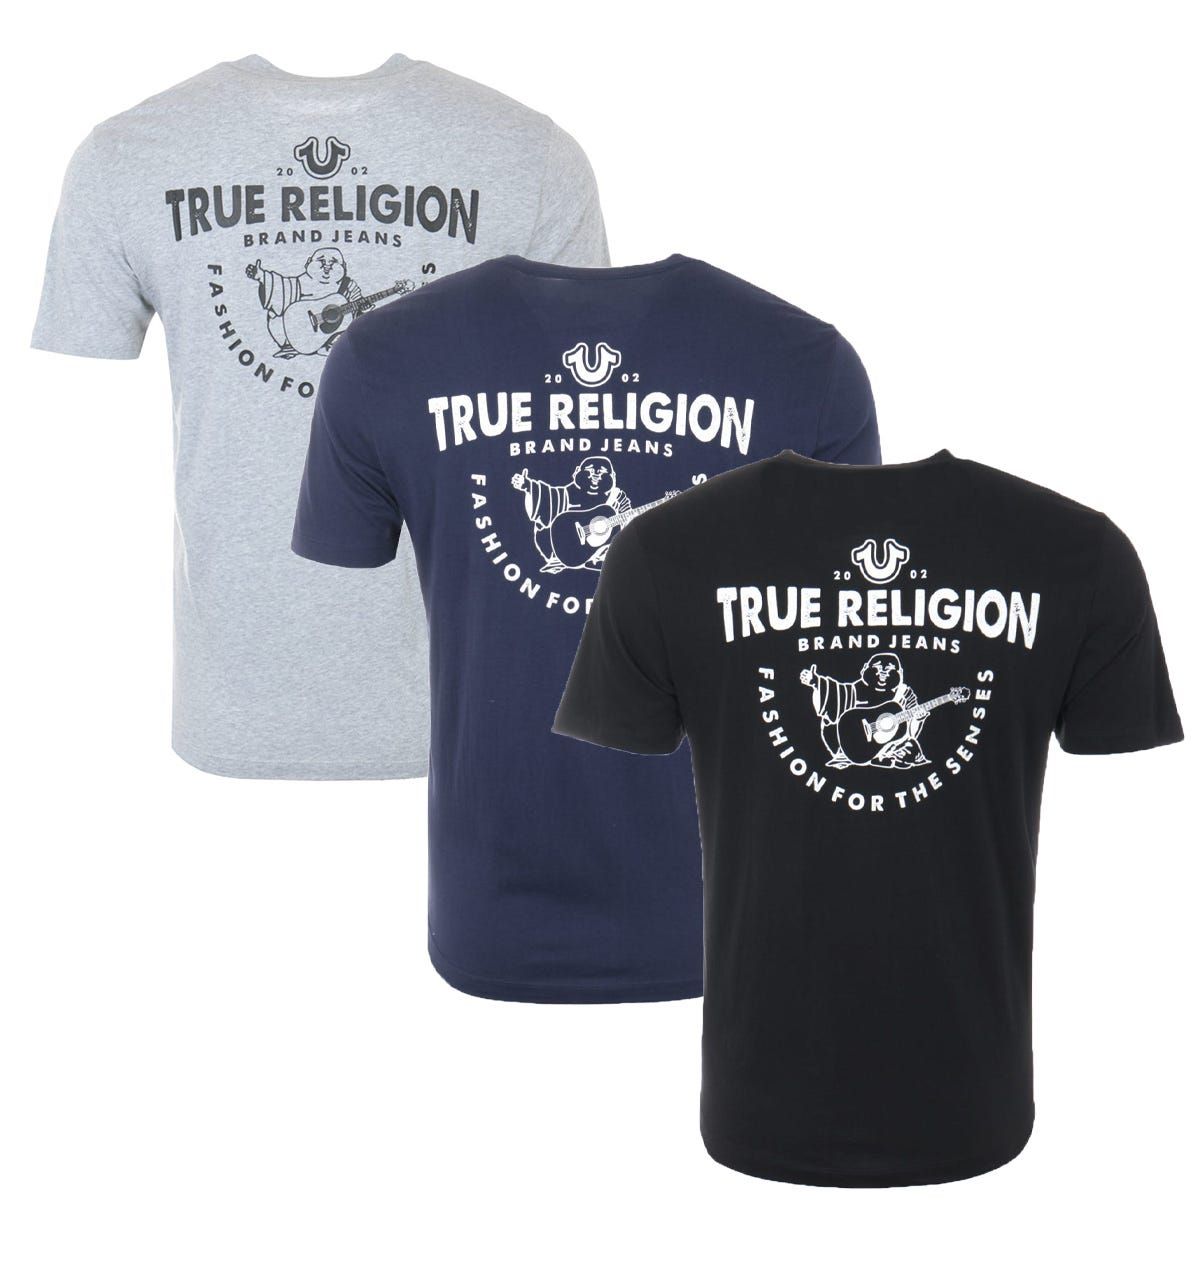 Founded in L.A back in 2002, True Religion have become global denim experts who have redesigned and reinvented the traditional five pocket jean. They quickly became known for quality craftsmanship, bold designs and the iconic lucky horseshoe logo.The perfect logo tee for every season. Crafted from pure cotton, providing comfort and breathability, featuring a classic crew neck design with a core True Religion graphic logo print at the back and iconic horseshoe logo printed to the chest.Three PackRegular FitPure Cotton JerseyRibbed Crew NeckGraphic PrintShort SleevesTrue Religion BrandingStyle & Fit:Regular FitFits True to SizeComposition & Care: 100% CottonMachine Wash